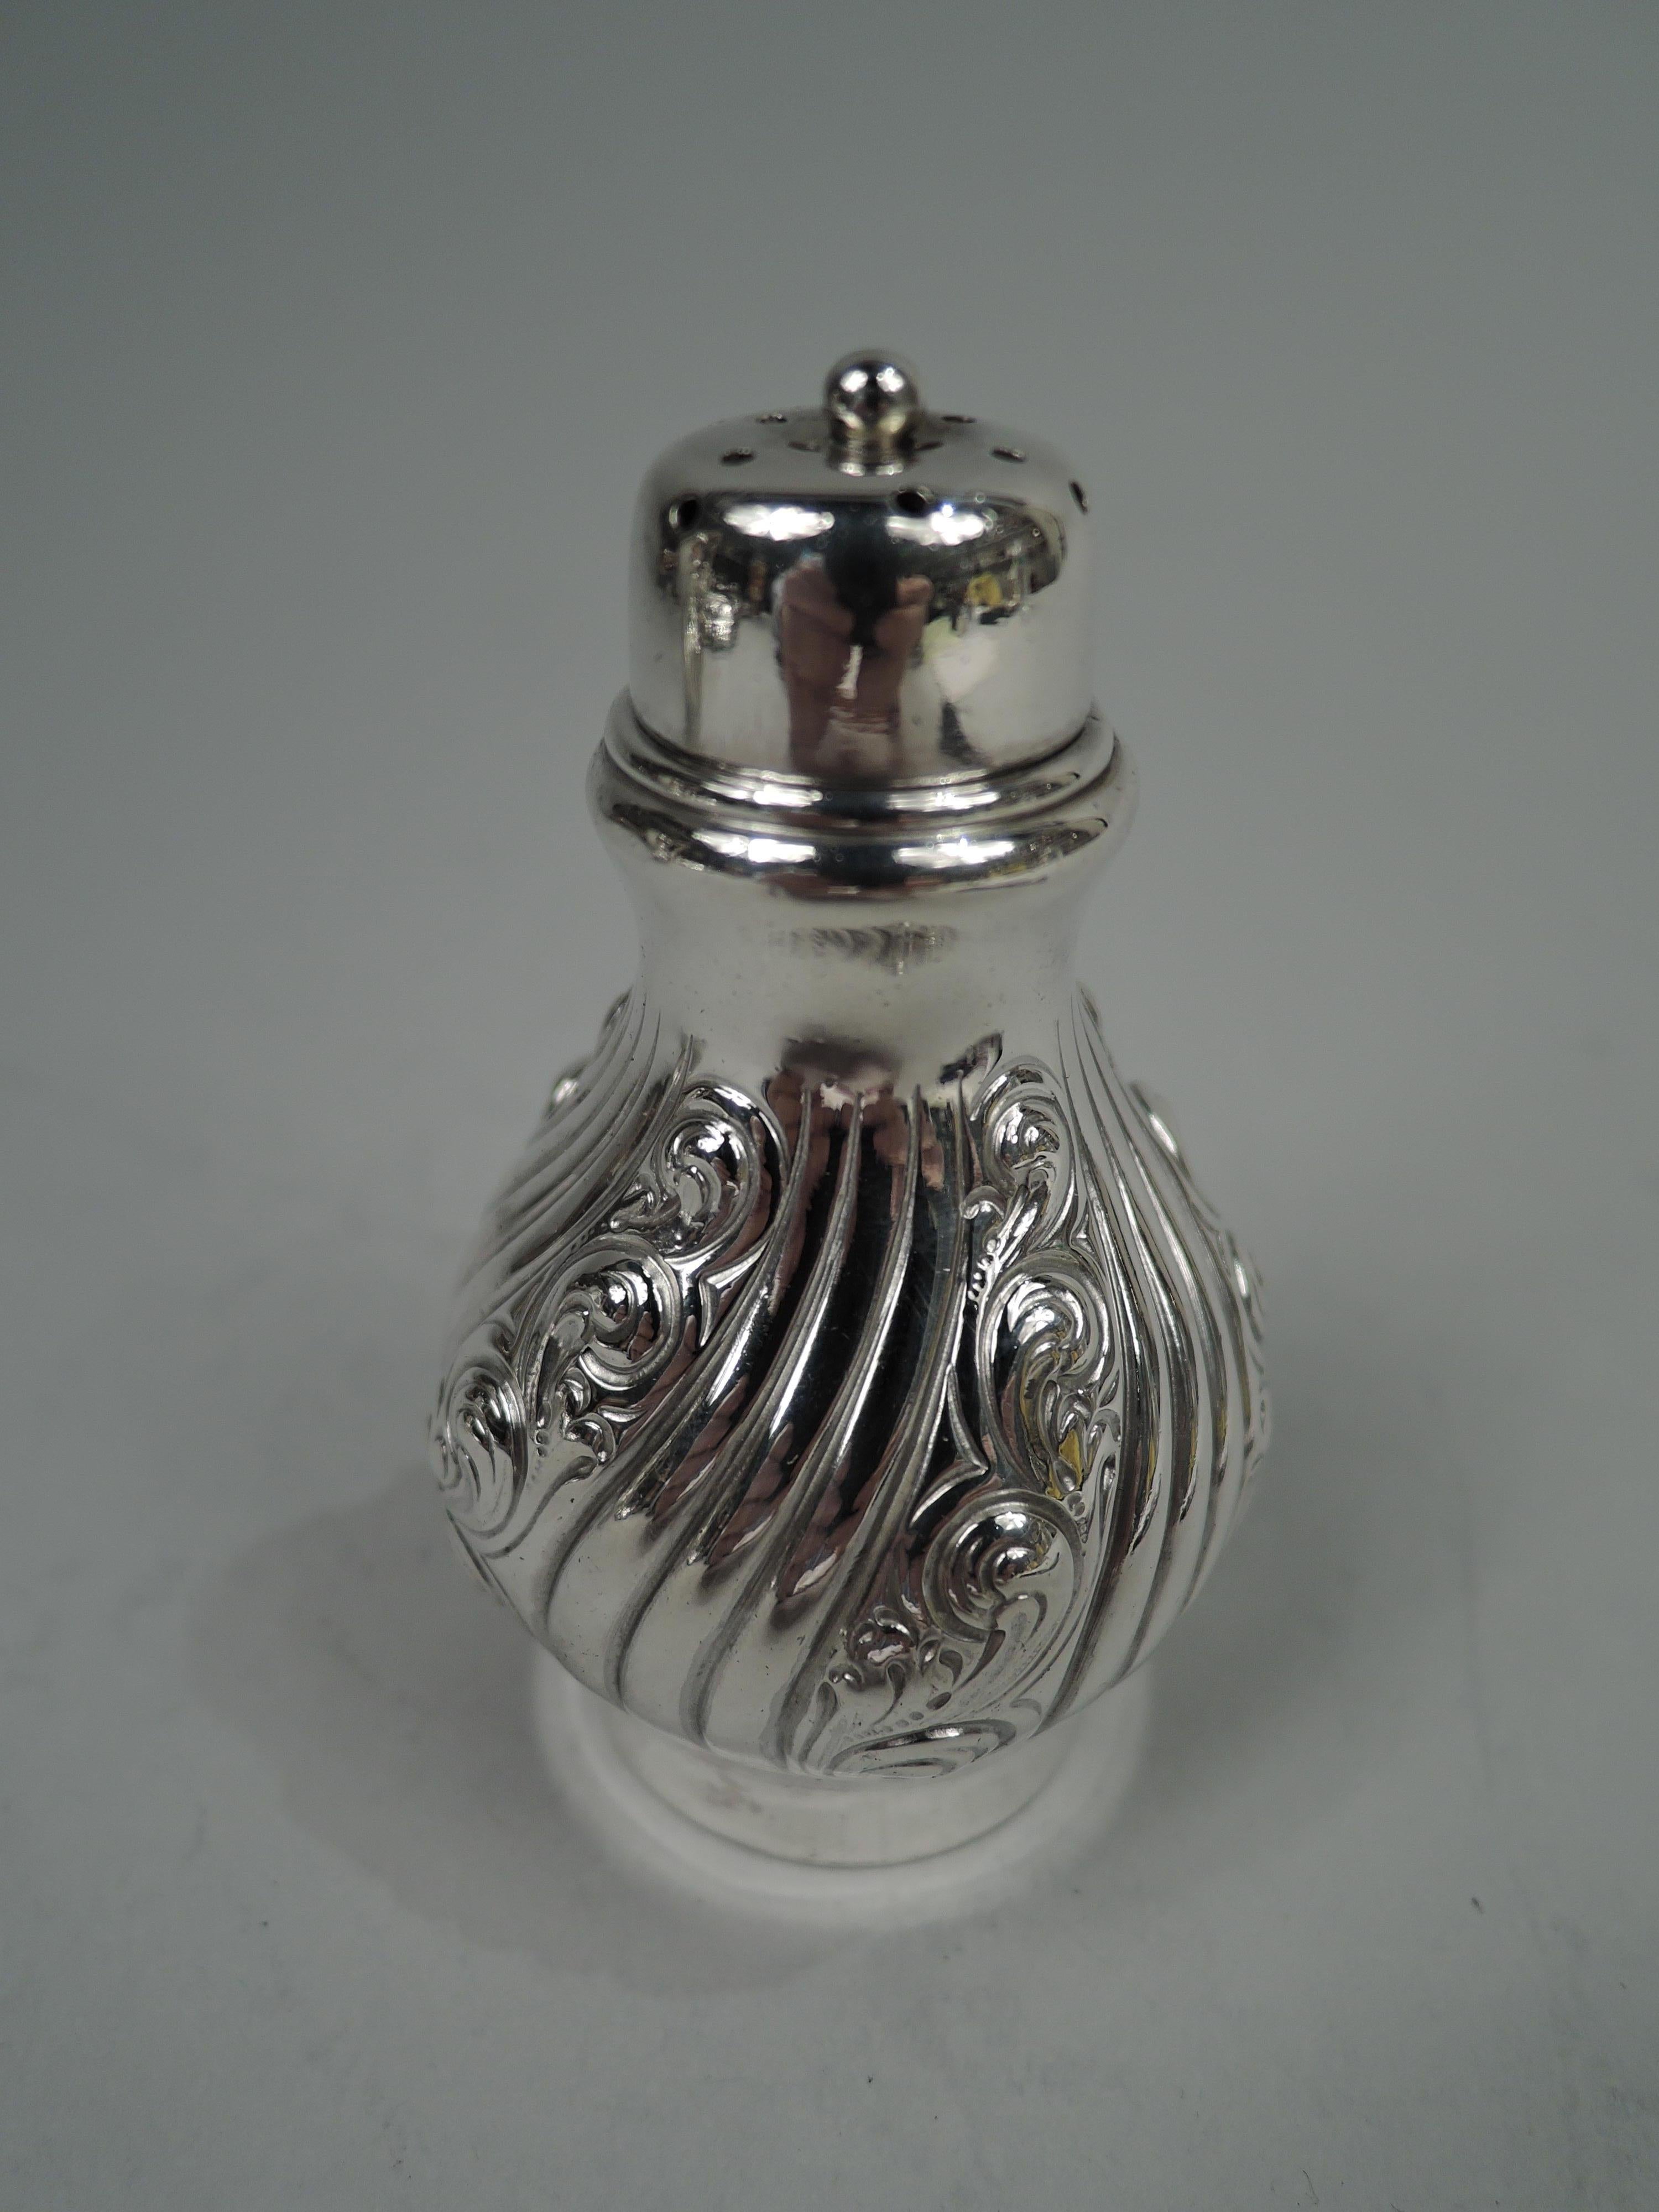 Pair of Edwardian Classical sterling silver salt and pepper shakers. Made by Dominick & Haff in New York, ca 1910. Each: Baluster with plain and narrow twisted gadroons interspersed with wide gadroons decorated with chased leafing scrollwork.